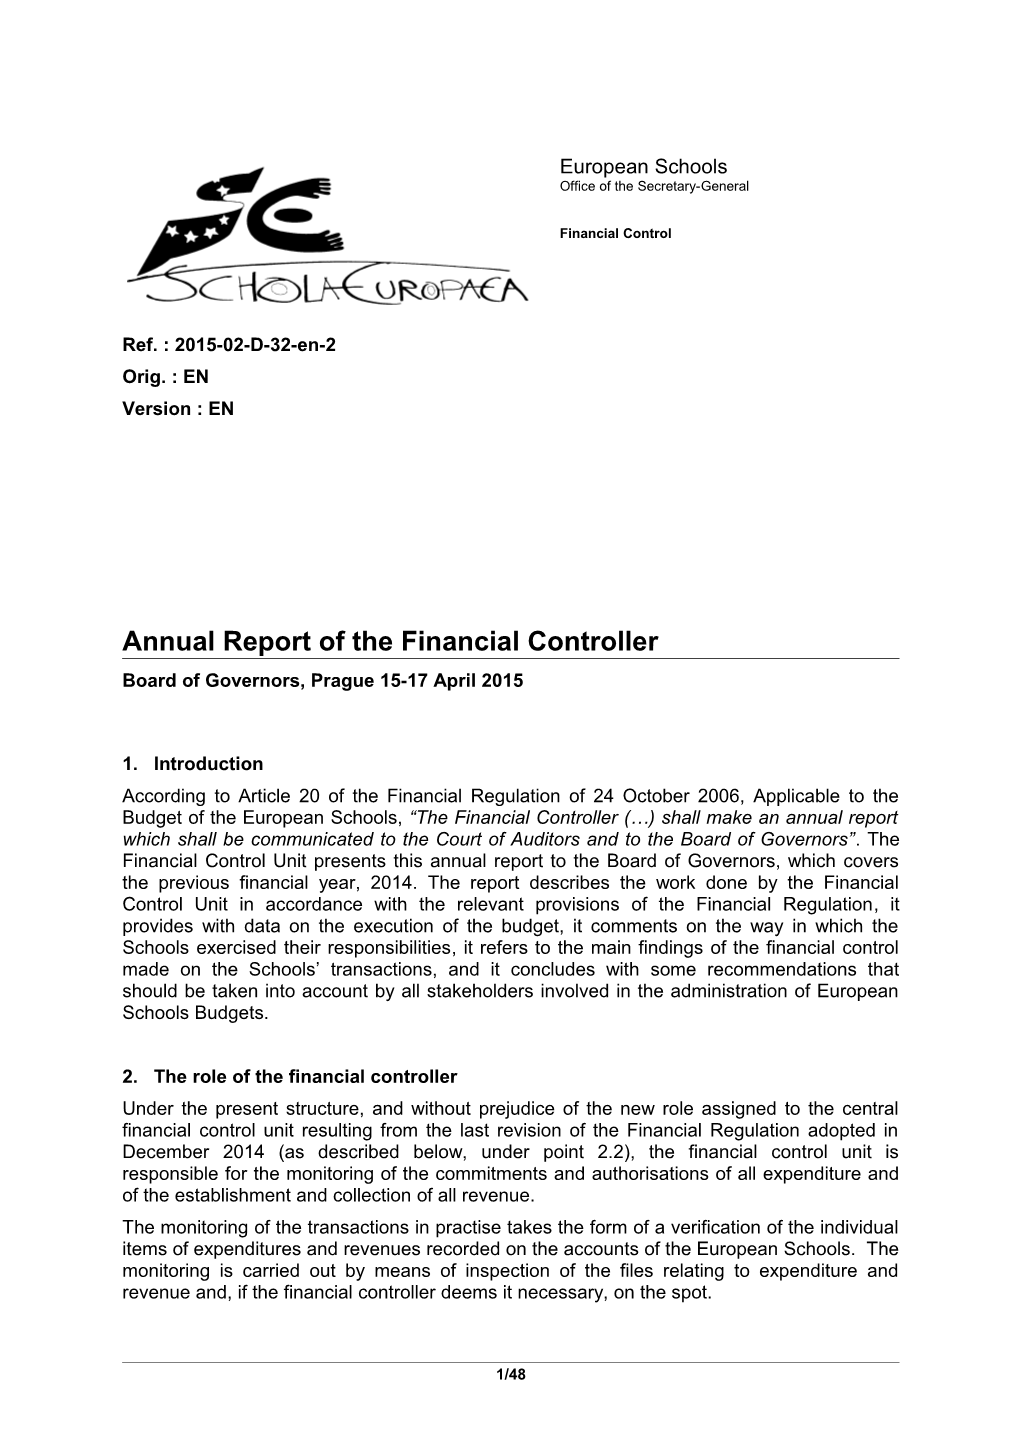 Annual Report of the Financial Controller 2015-02-D-32-En-2